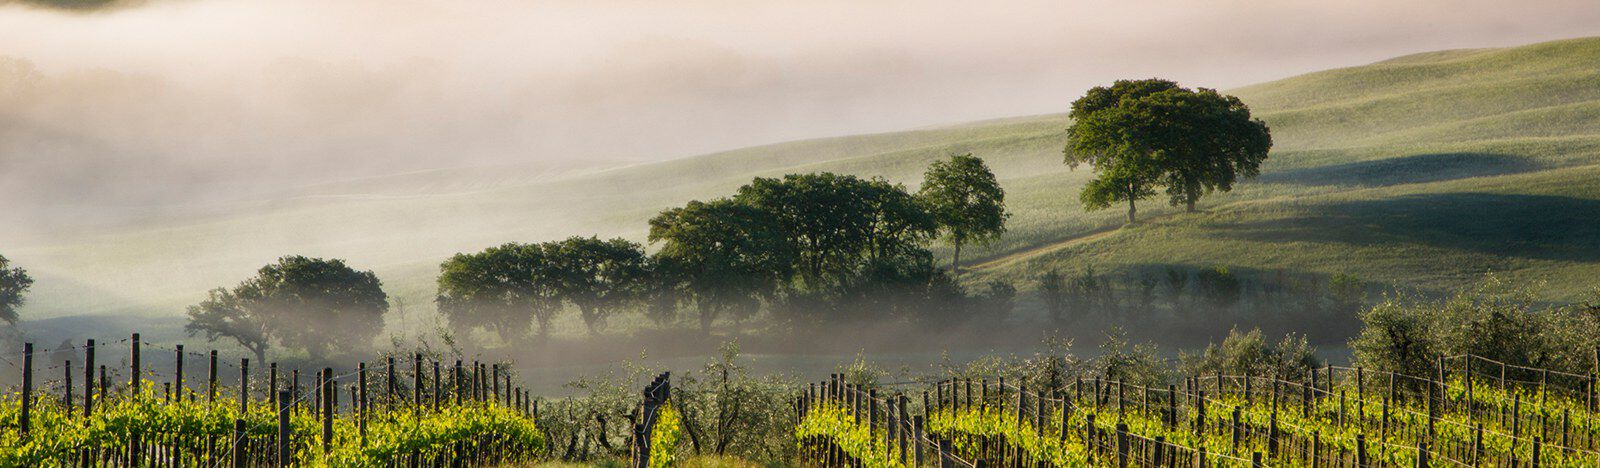 Wine vineyard with fog and trees and rolling hills in the background